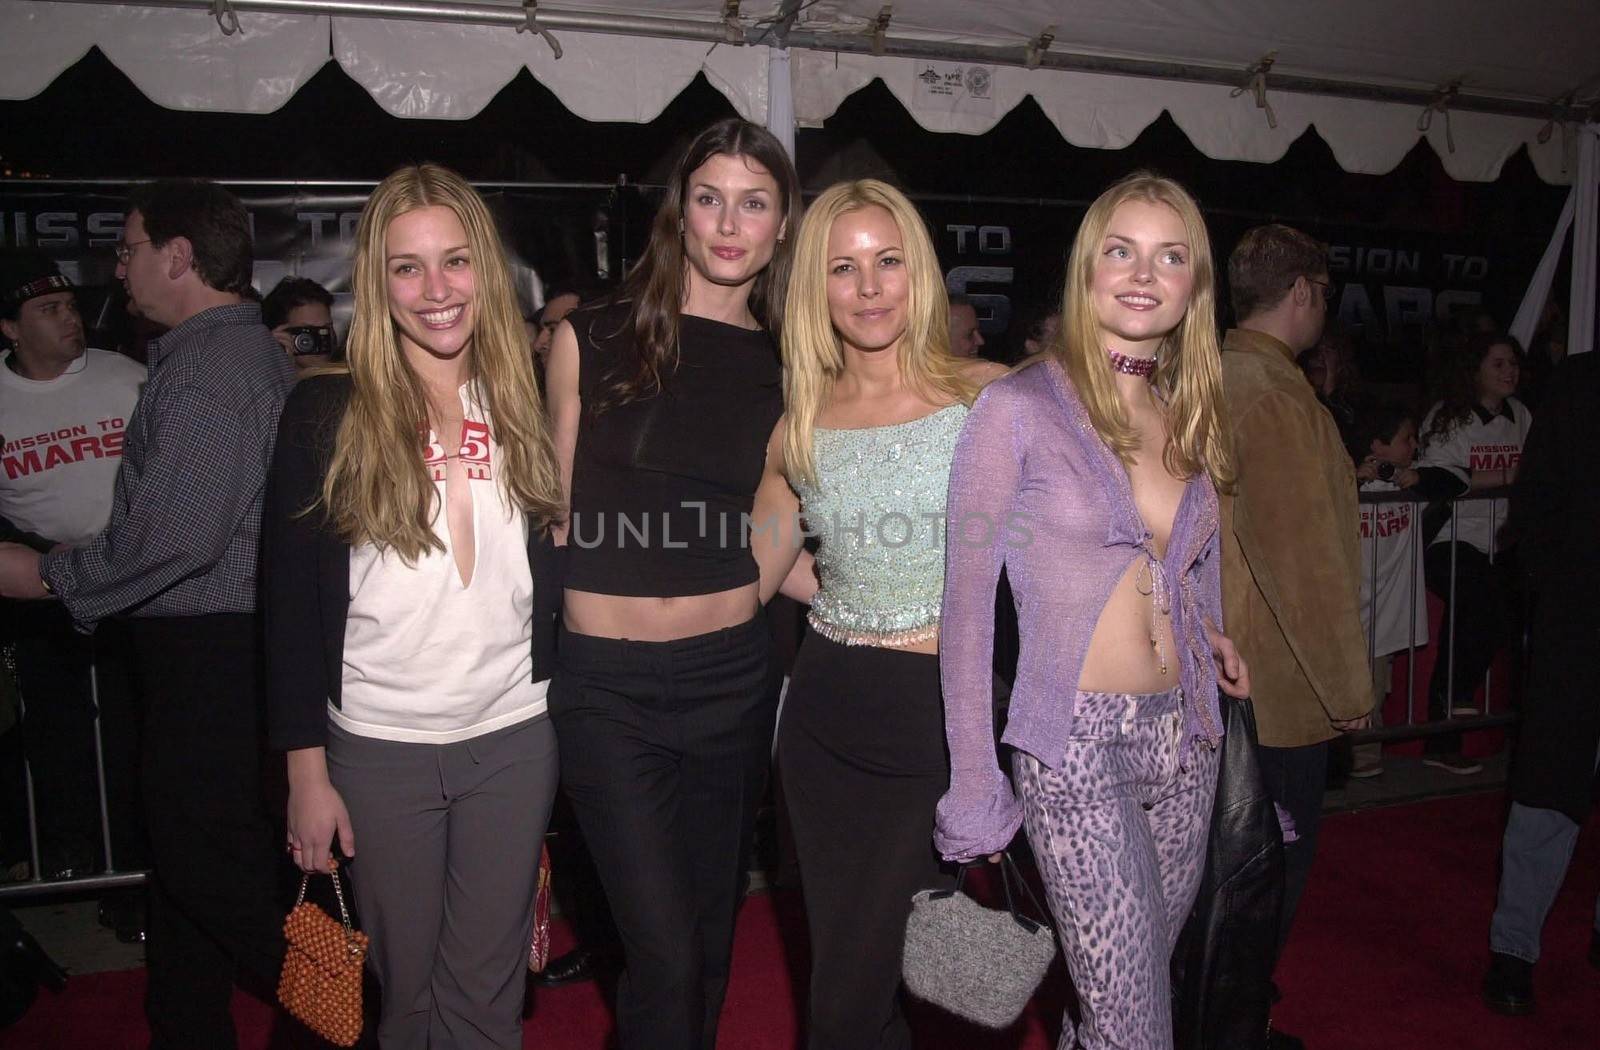 Piper Perabo, Bridget Moynahan, Maria Bello and Izabella Miko at the premiere of Touchstone's "MISSION TO MARS" in Hollywood, 03-06-00